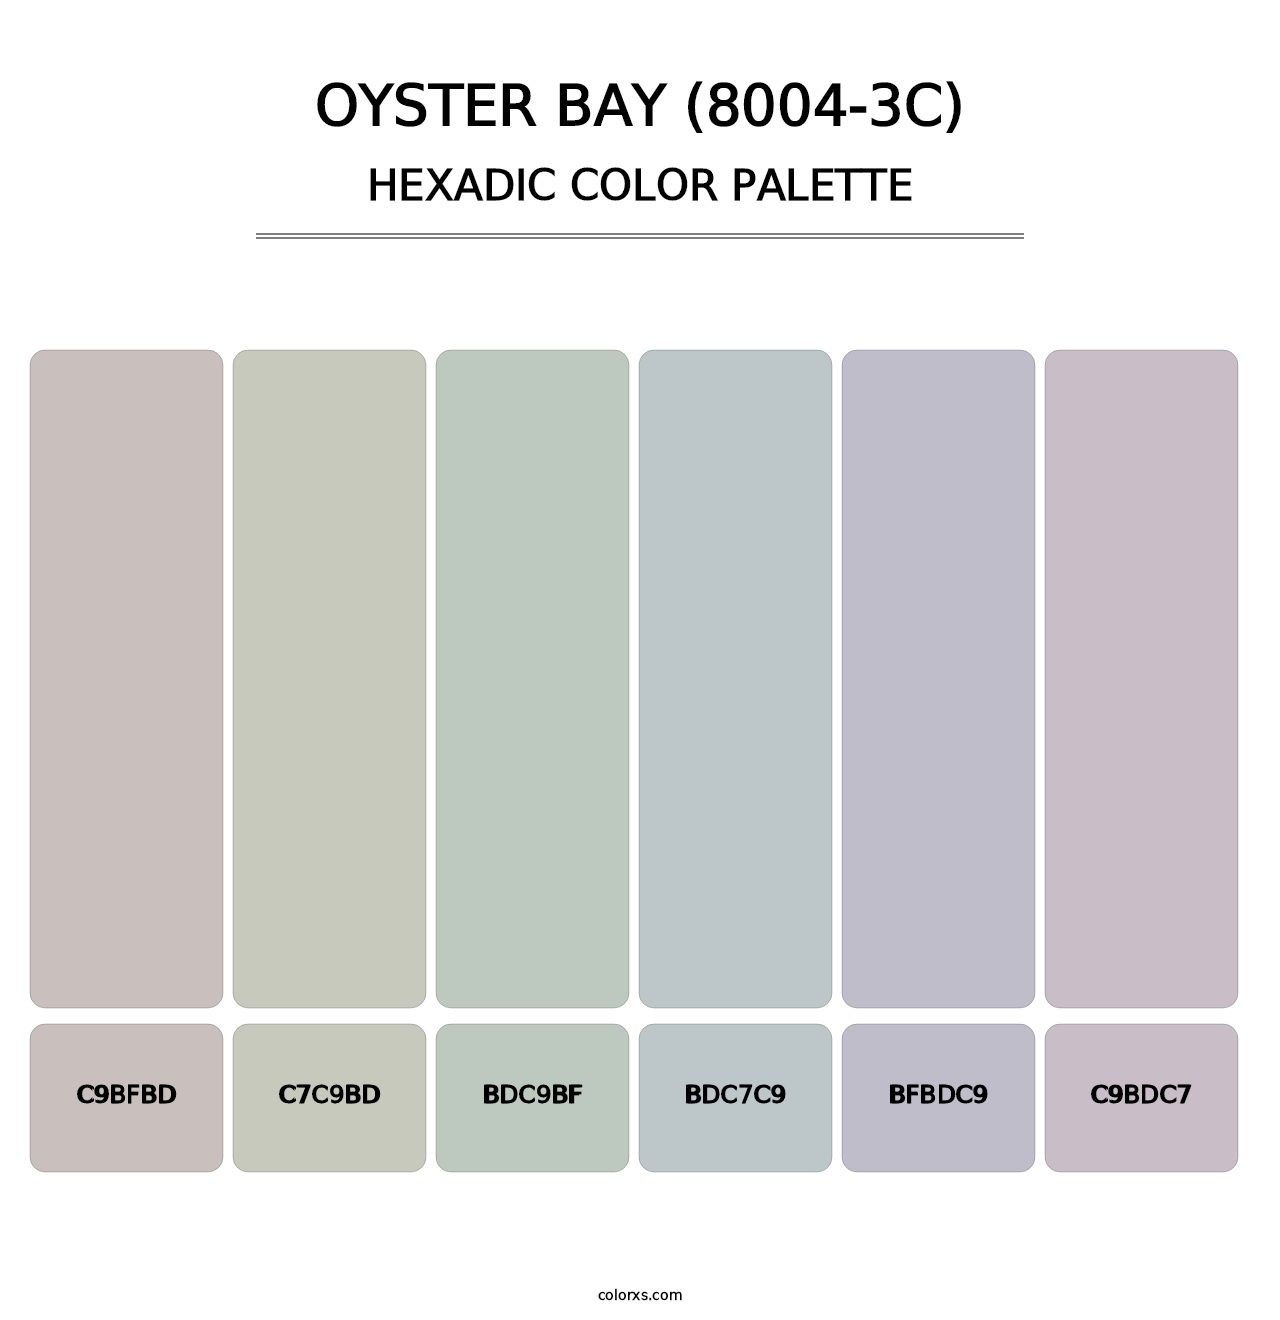 Oyster Bay (8004-3C) - Hexadic Color Palette